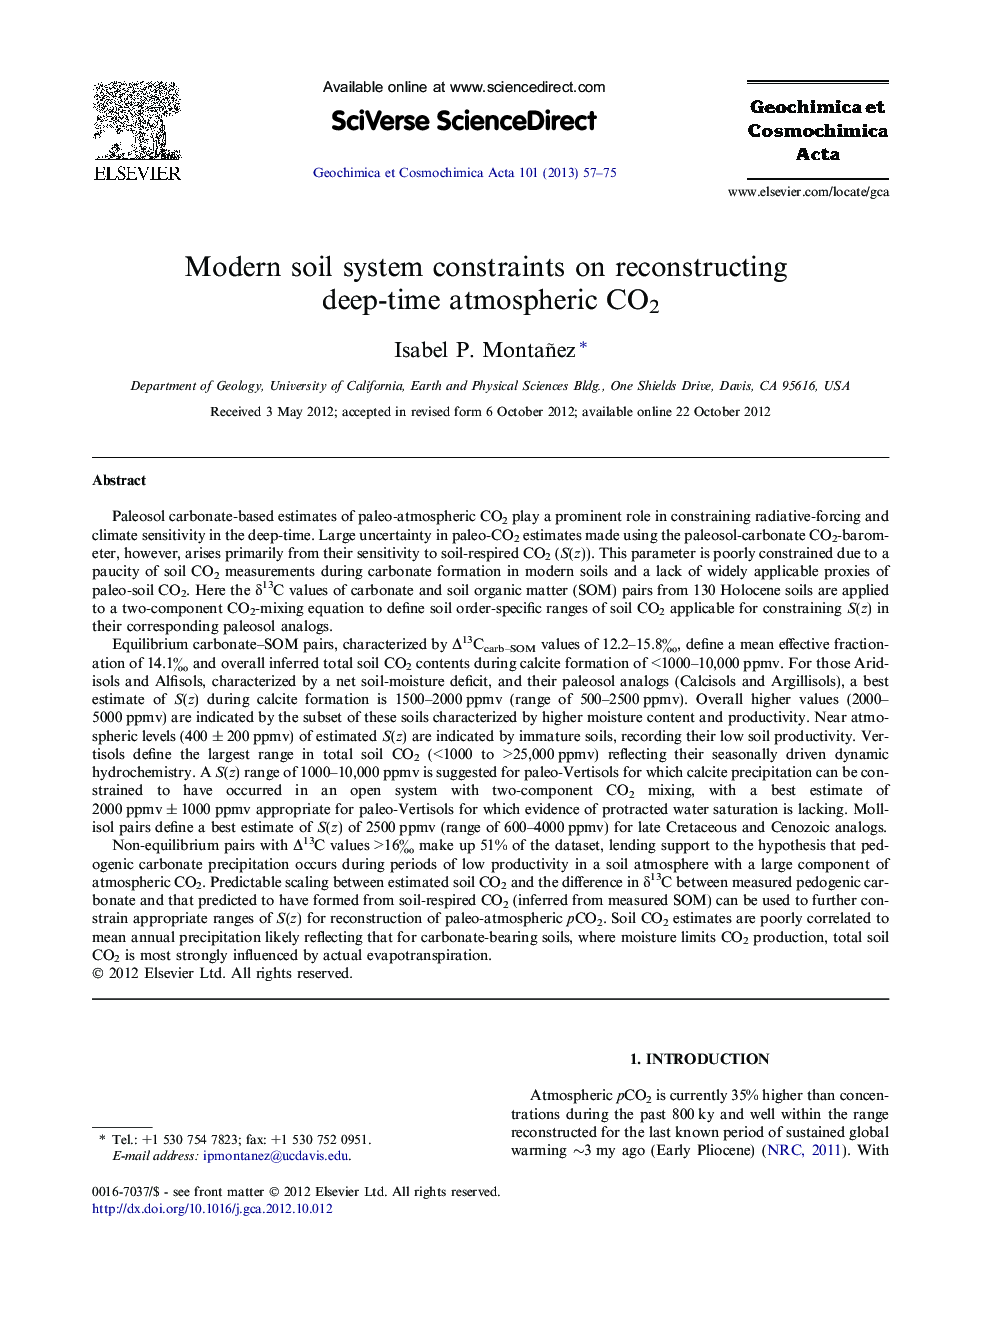 Modern soil system constraints on reconstructing deep-time atmospheric CO2